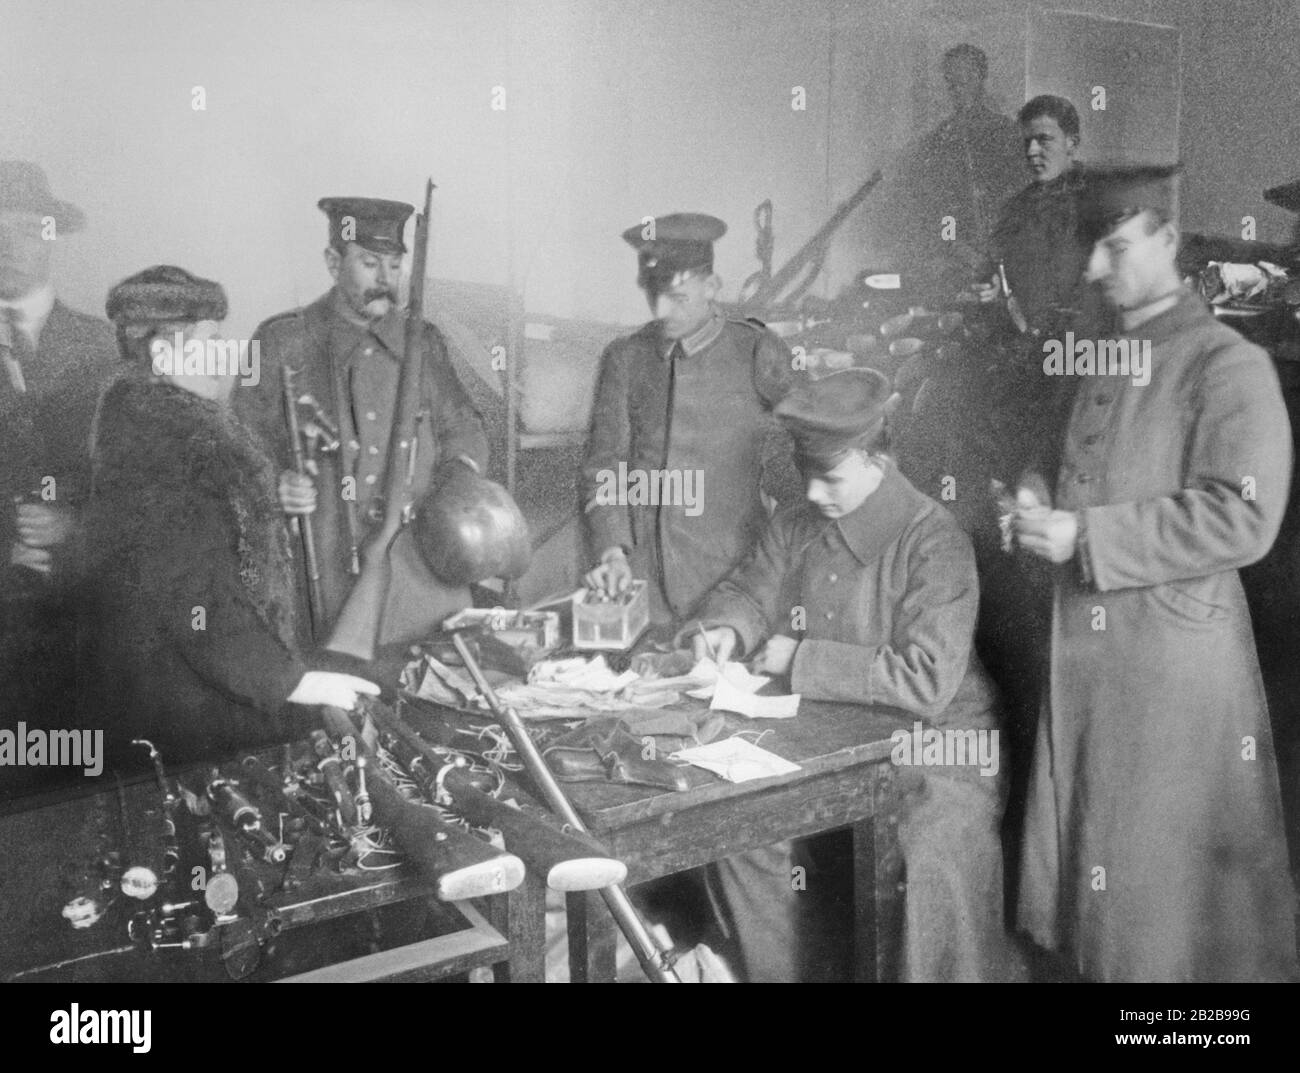 A snapshot from the weapons collection point of the Alexanderkaserne in Berlin in the winter of 1918/19, where, among others, some women are also responsible for ensuring that the men returning from the front deliver their weapons. Stock Photo